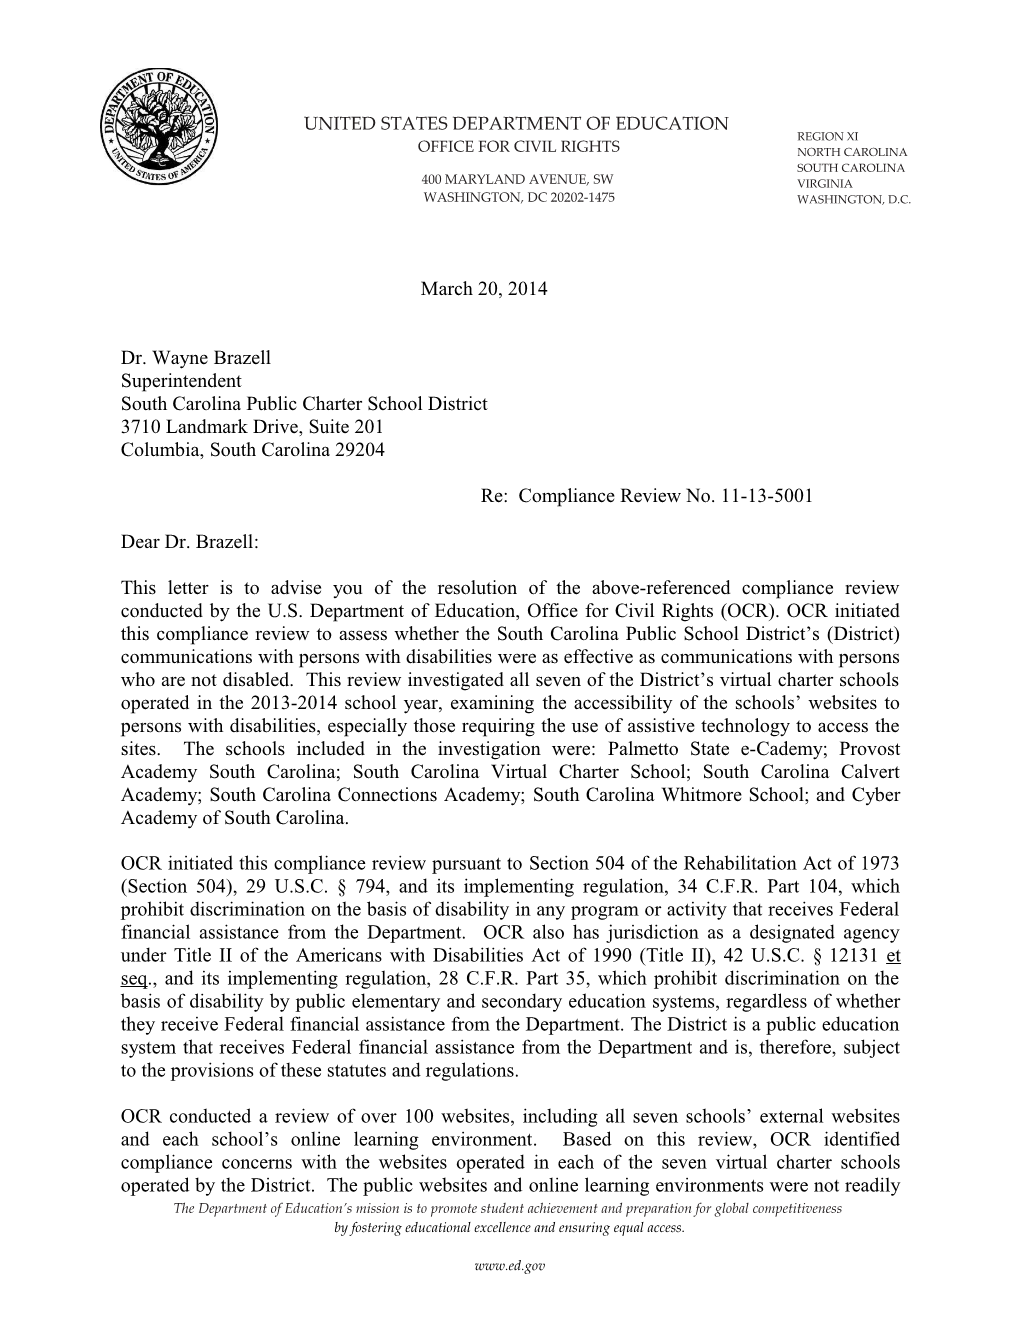 Resolution Letter: South Carolina Public Charter School District: Compliance Review #11-13-5001